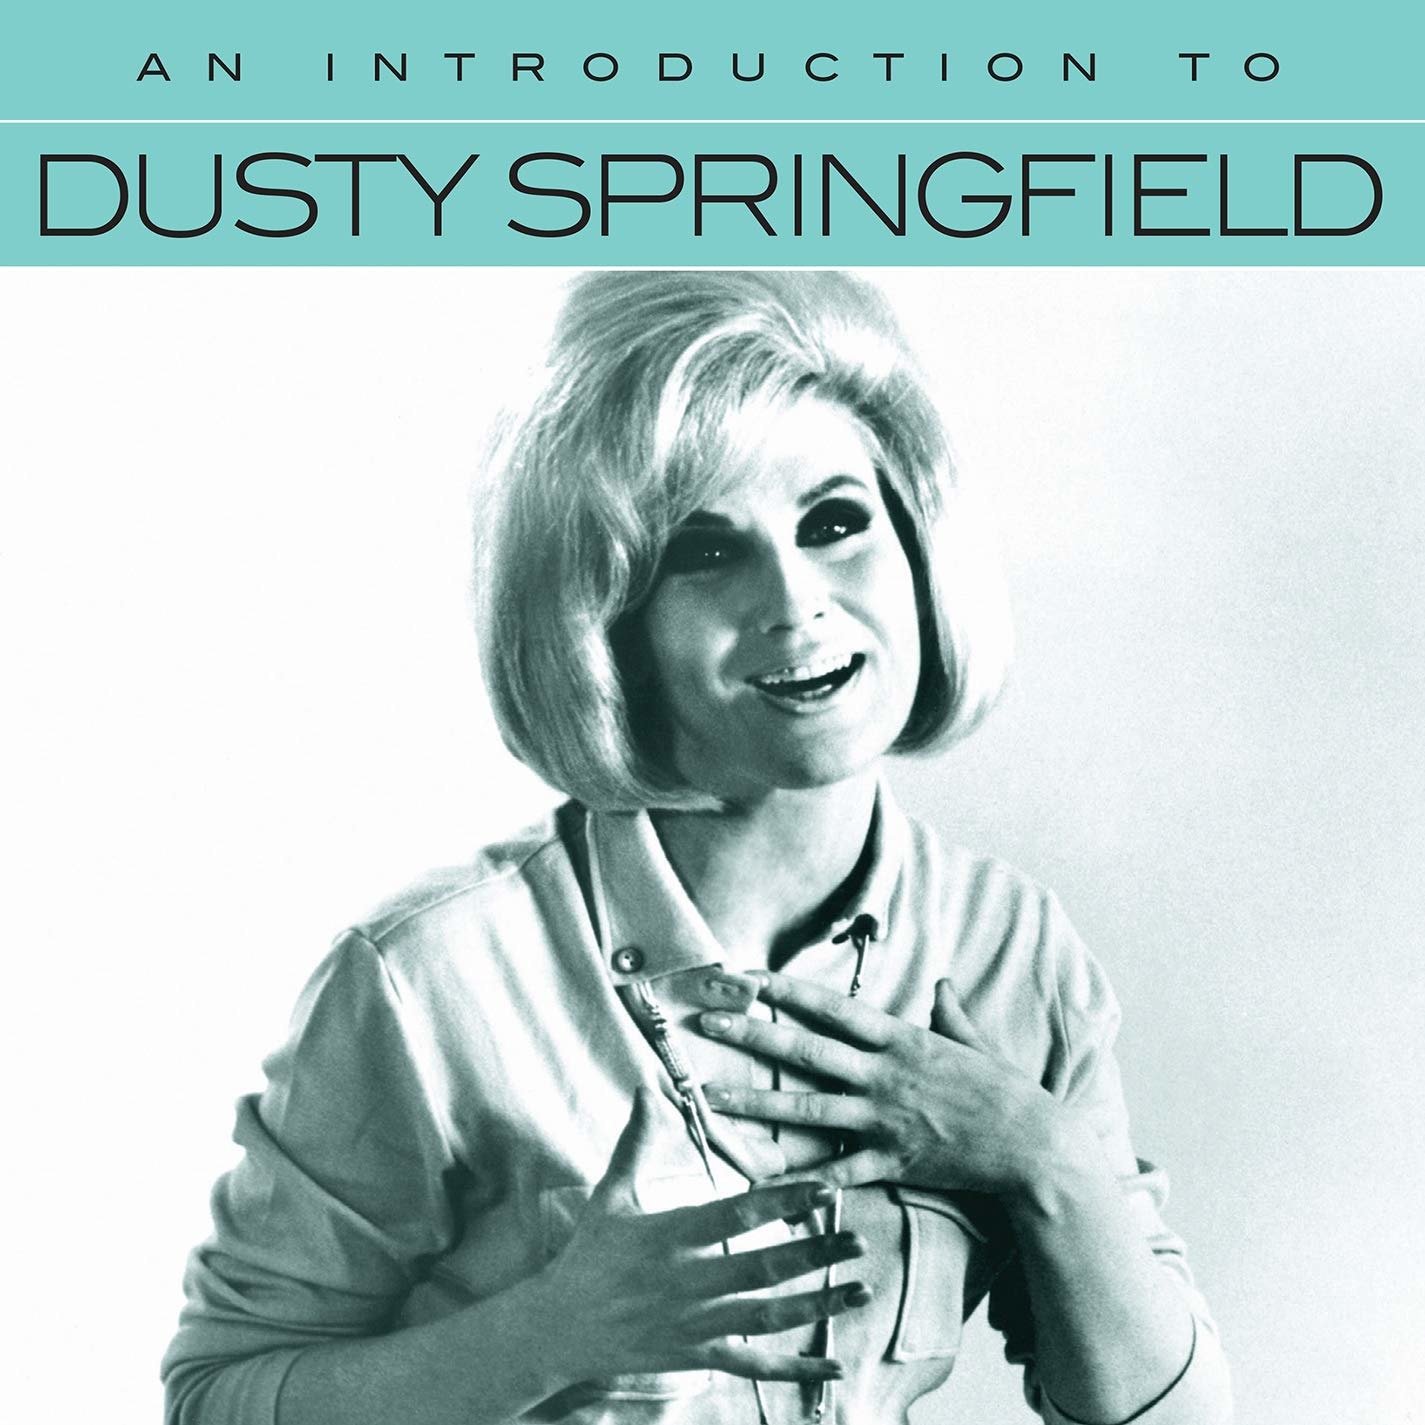 CD Shop - SPRINGFIELD, DUSTY AN INTRODUCTION TO